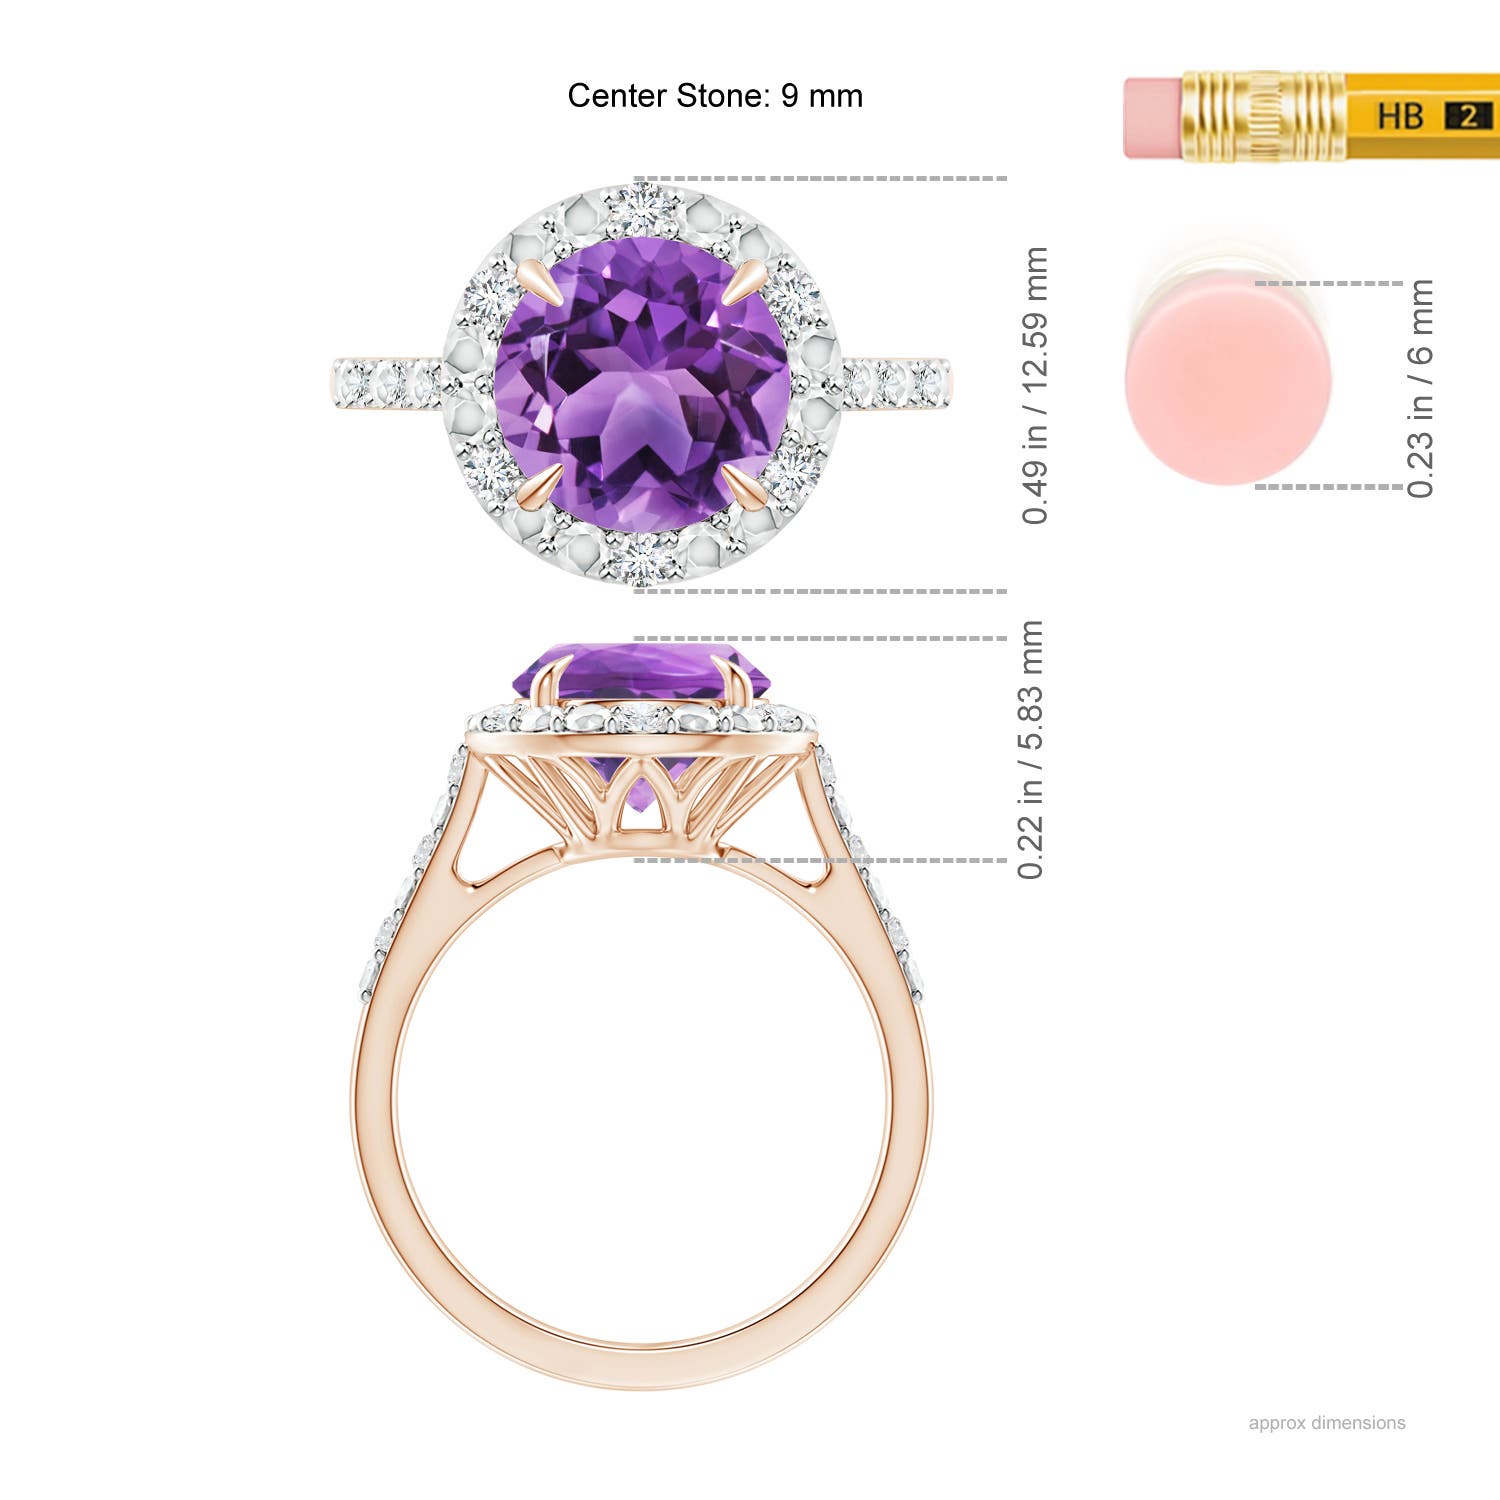 AA - Amethyst / 2.61 CT / 14 KT Rose Gold